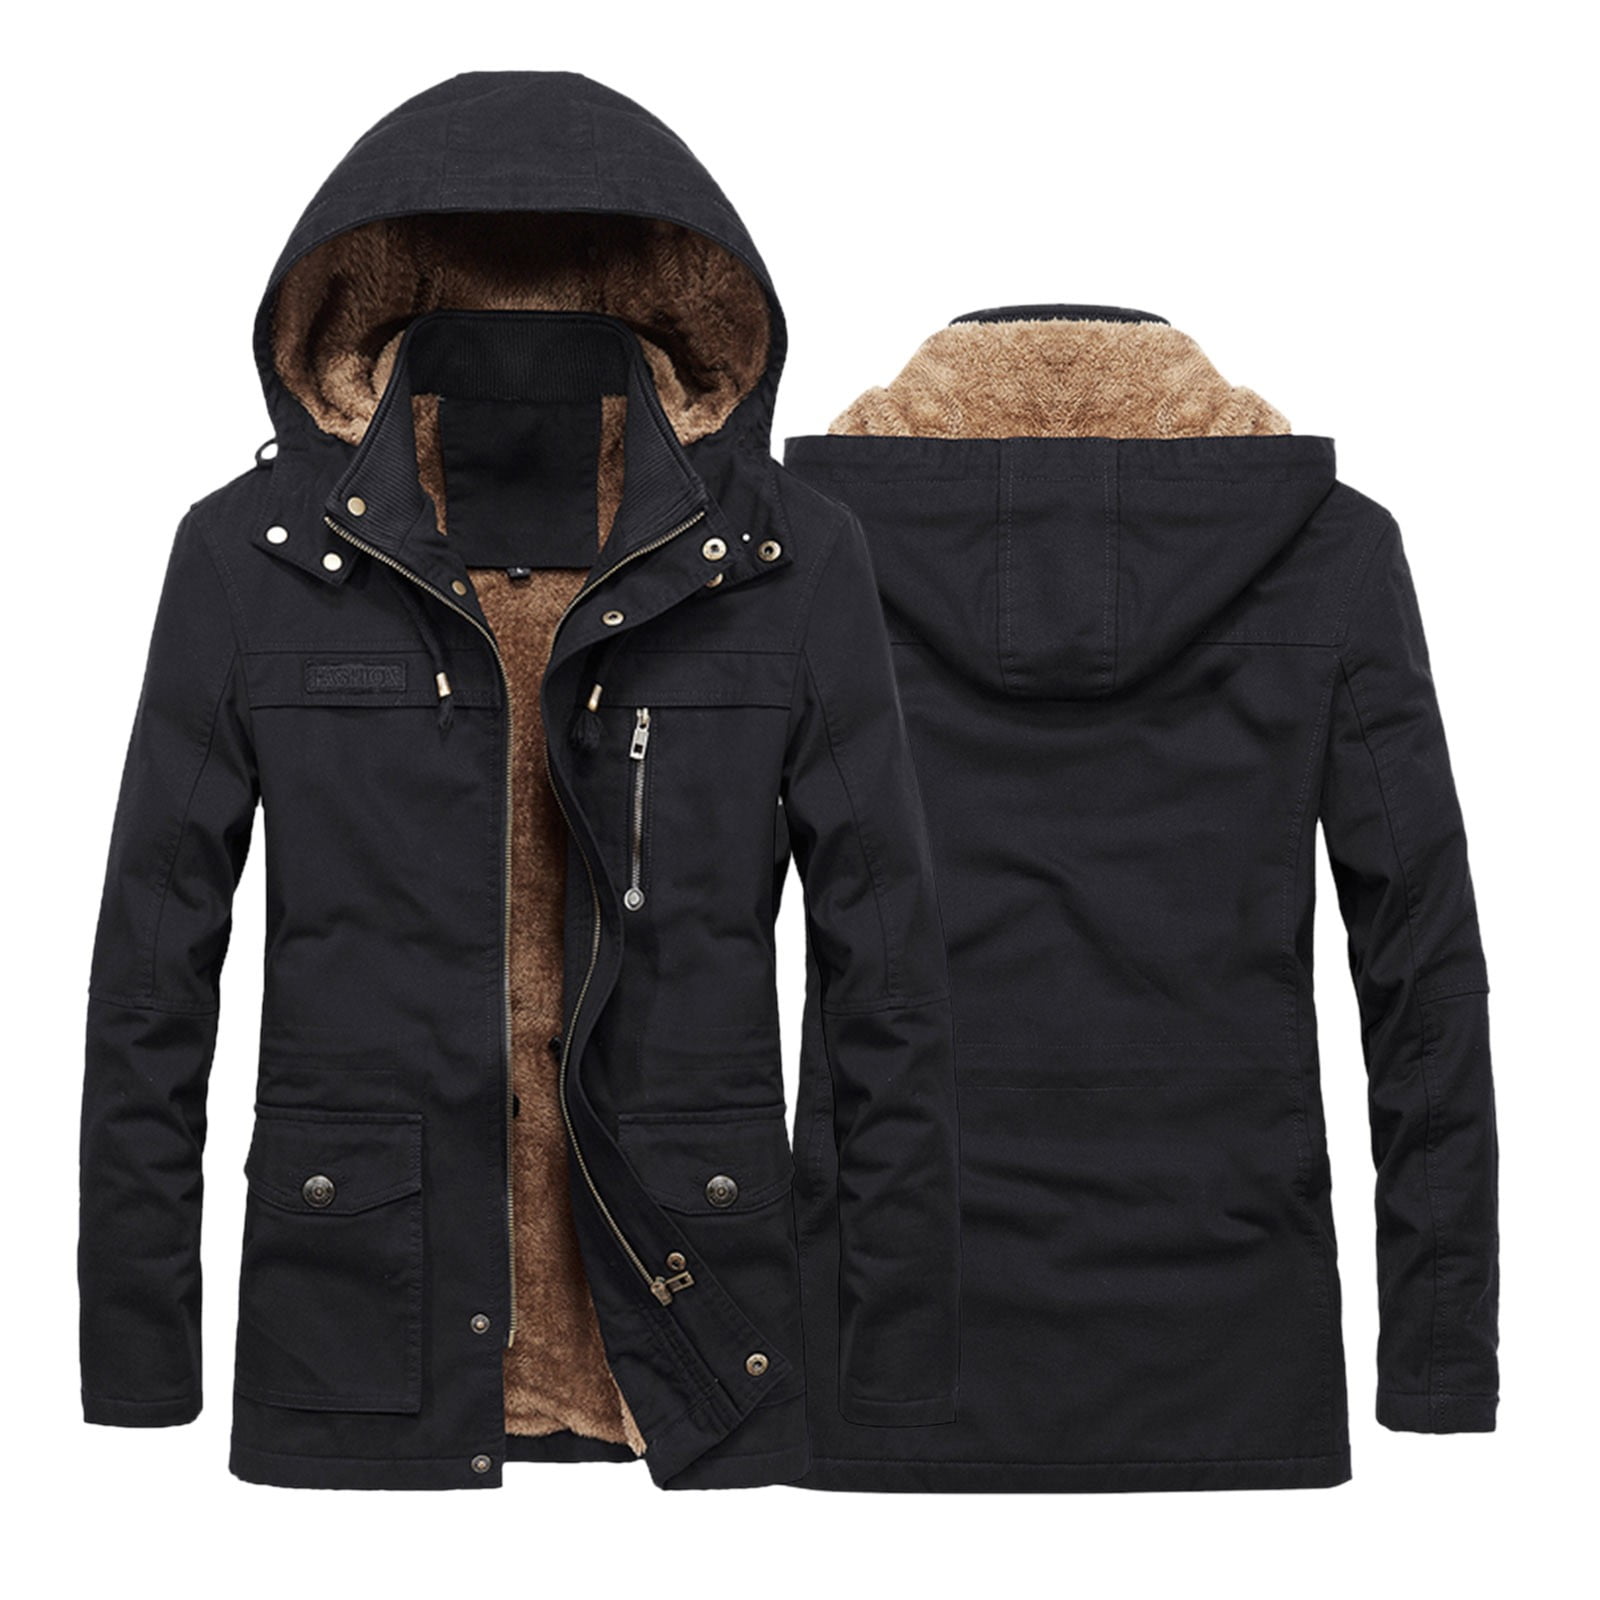 Rovga Men Jacket Autumn And Winter Coat Casual Stand-Up Collar Warmth ...